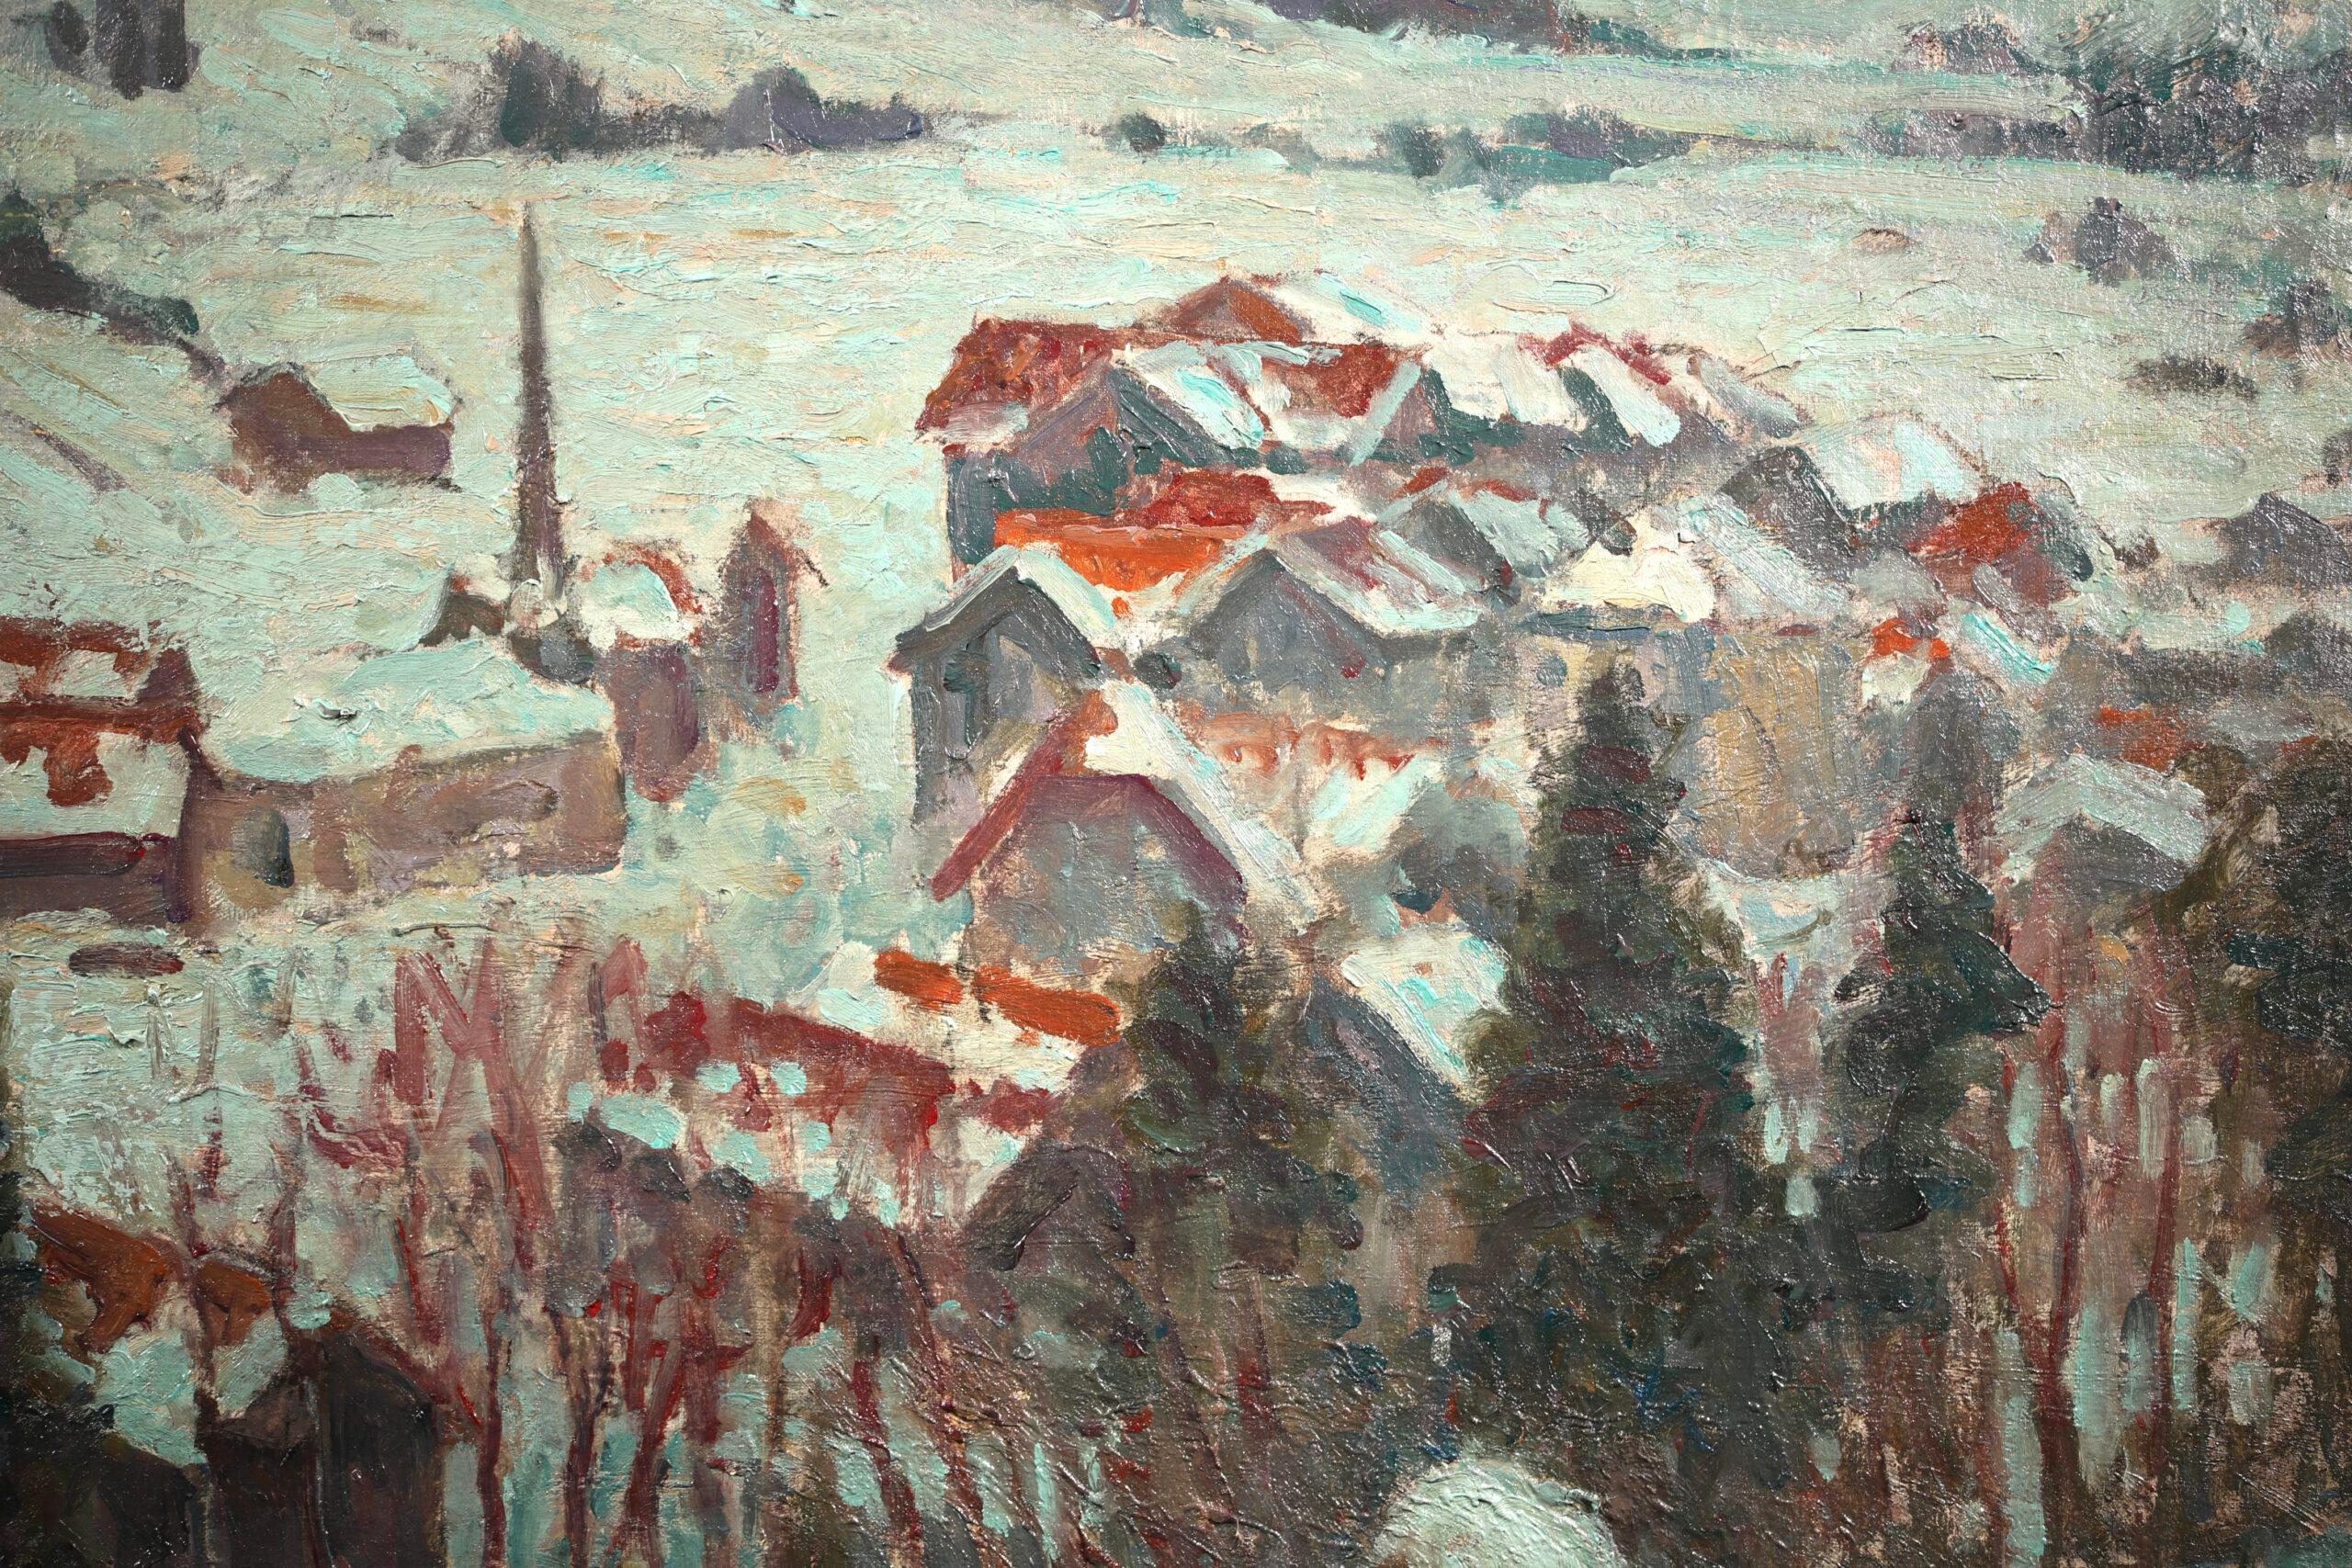 Winter Snow - Gstaad - Impressionist Landscape Oil by William Samuel Horton For Sale 6